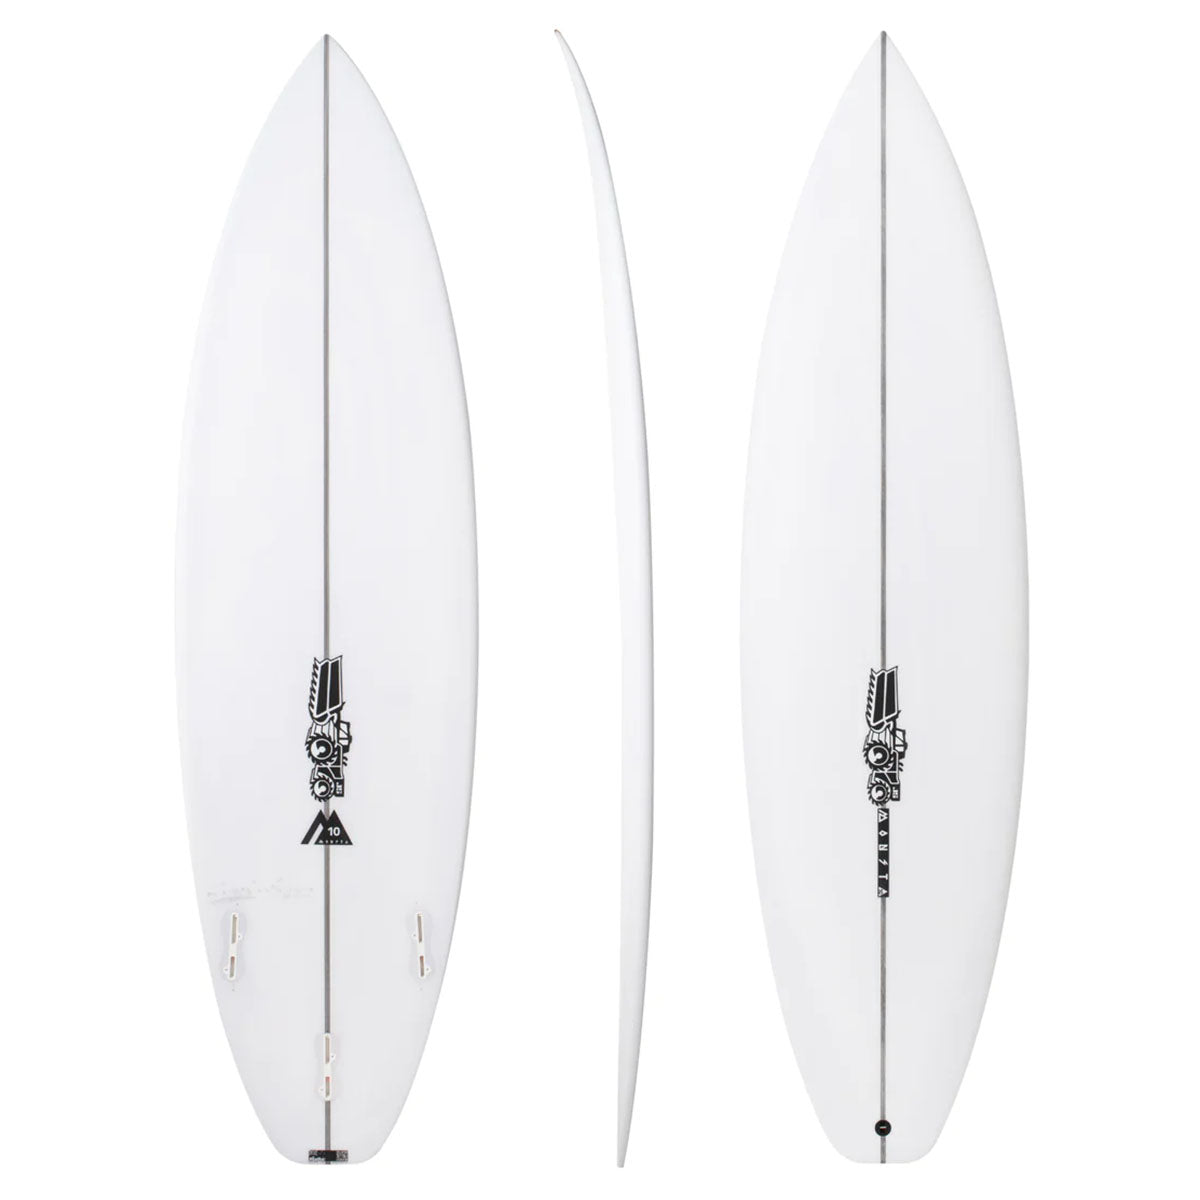 JS Monsta 10 PU Surfboard - Buy online today at Down the Line Surf. International shipping available.